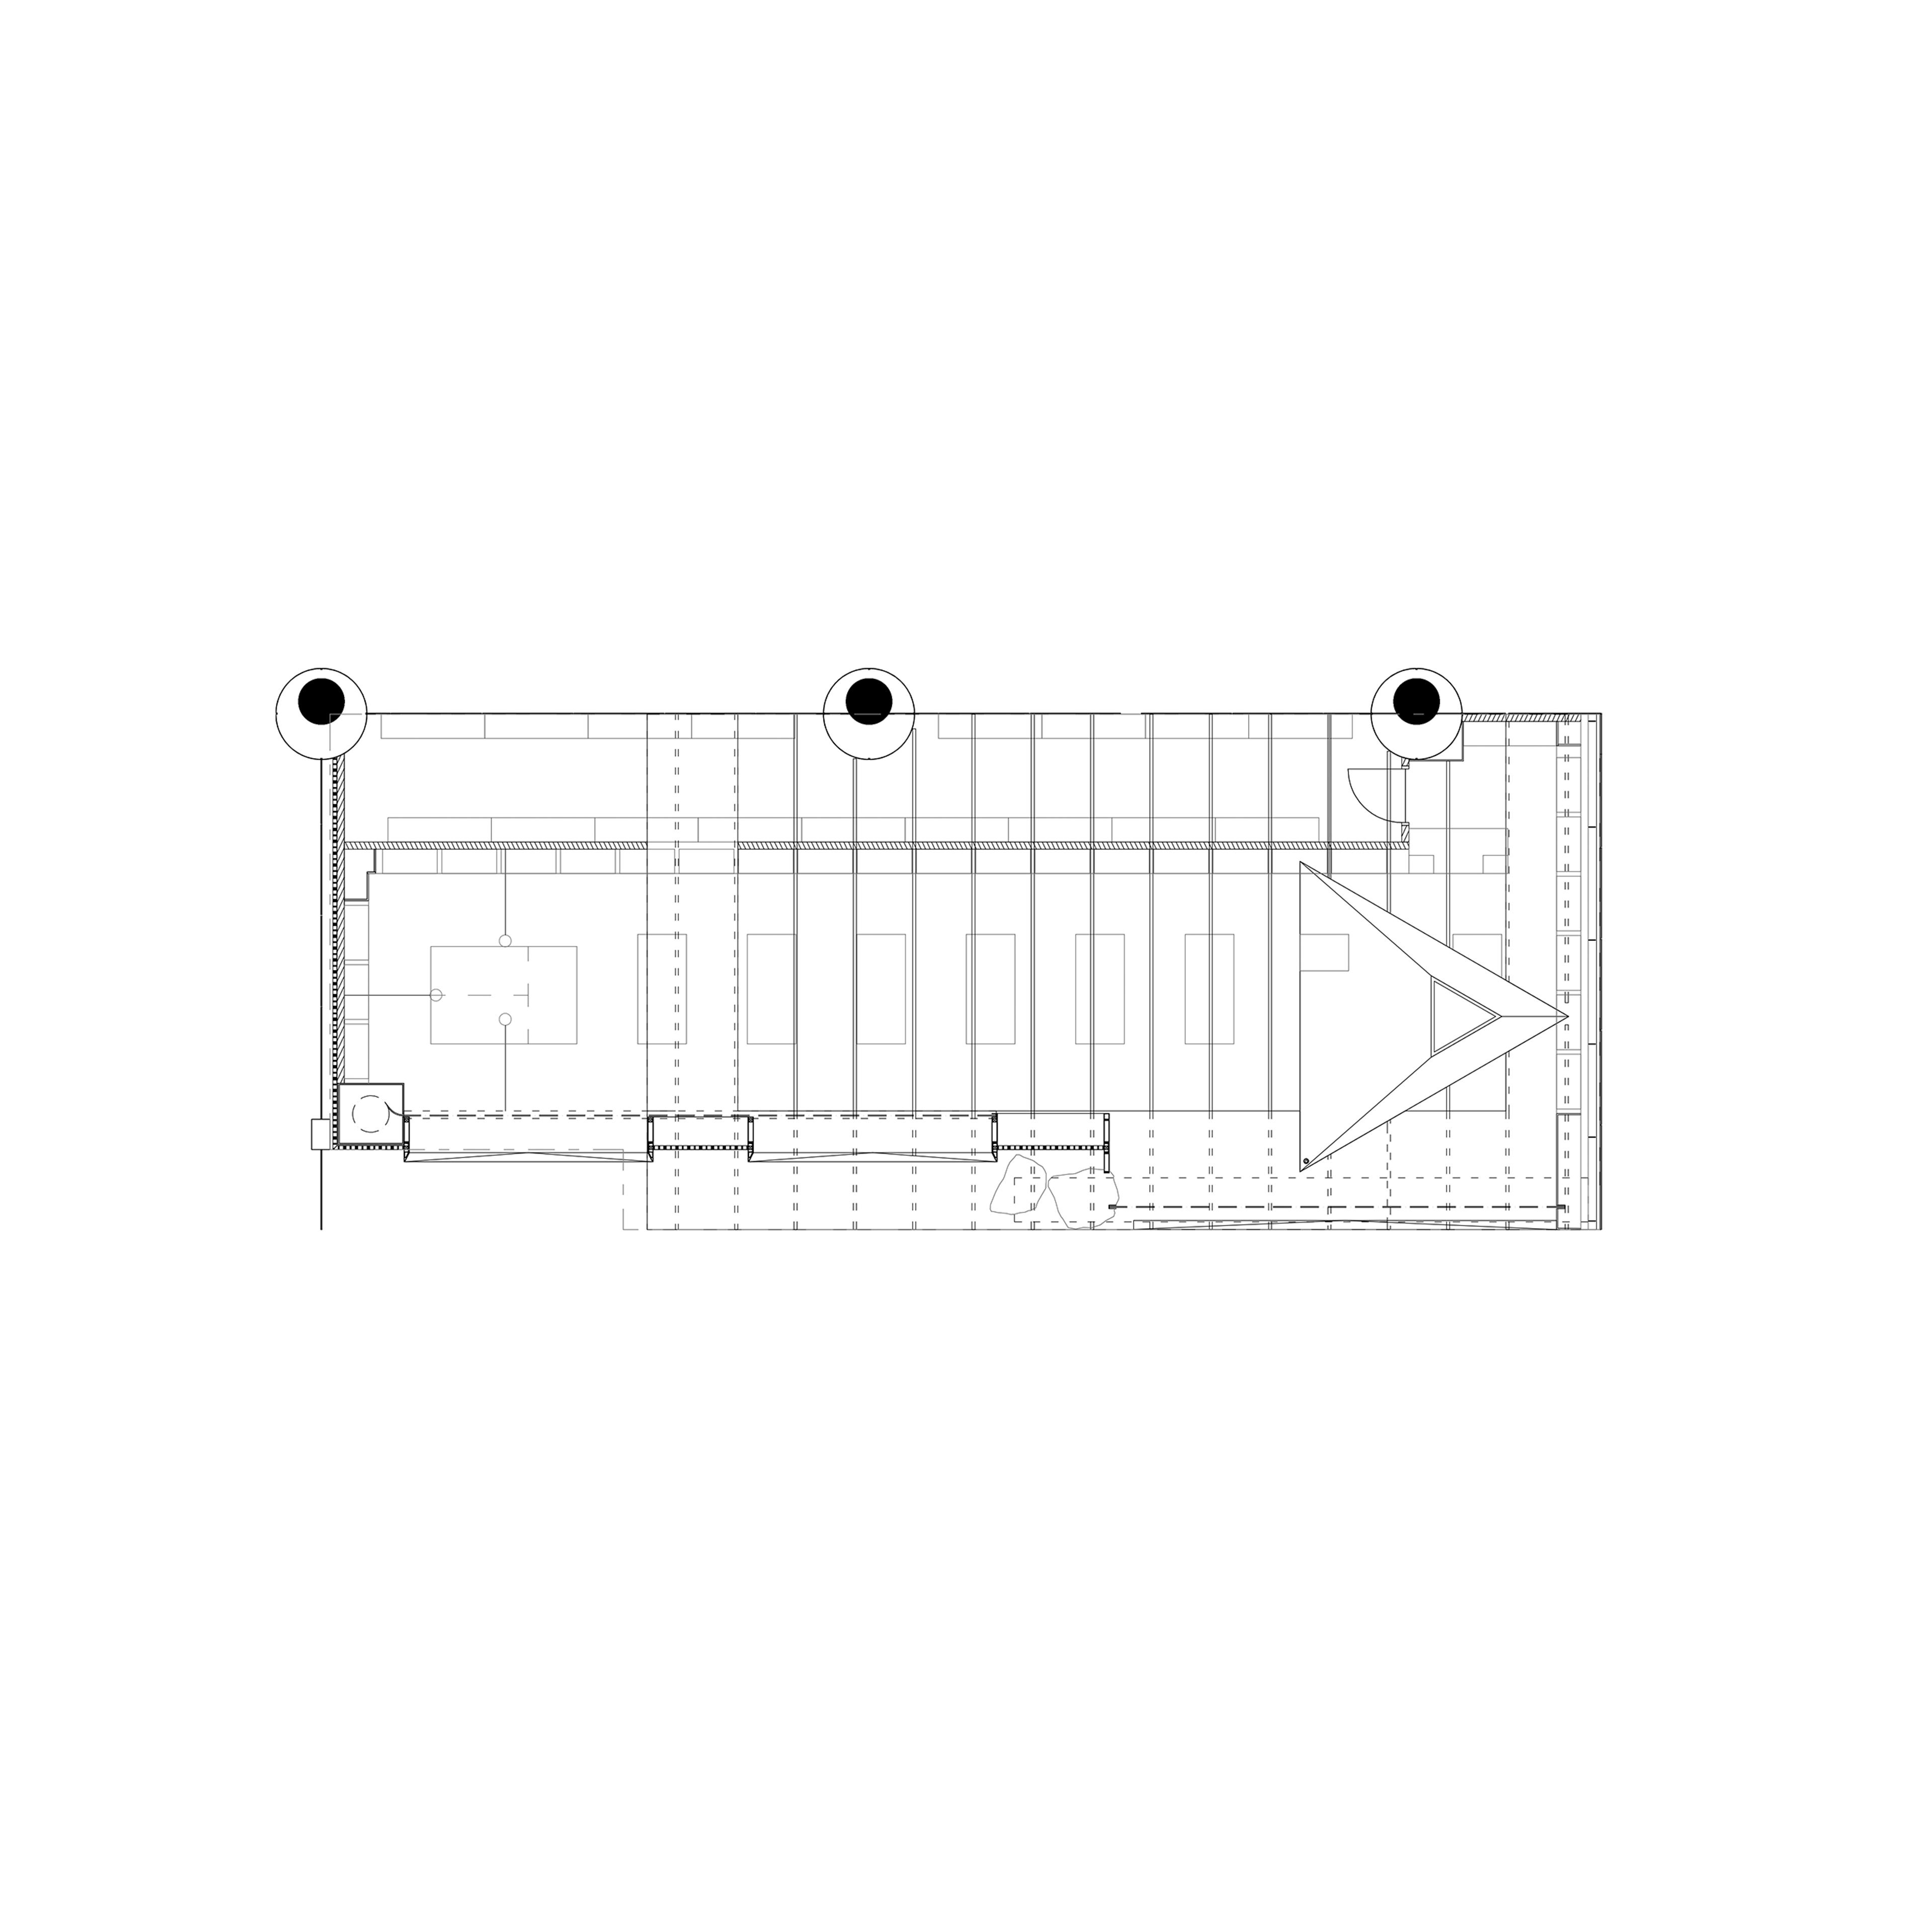 roof plan of a pavilion